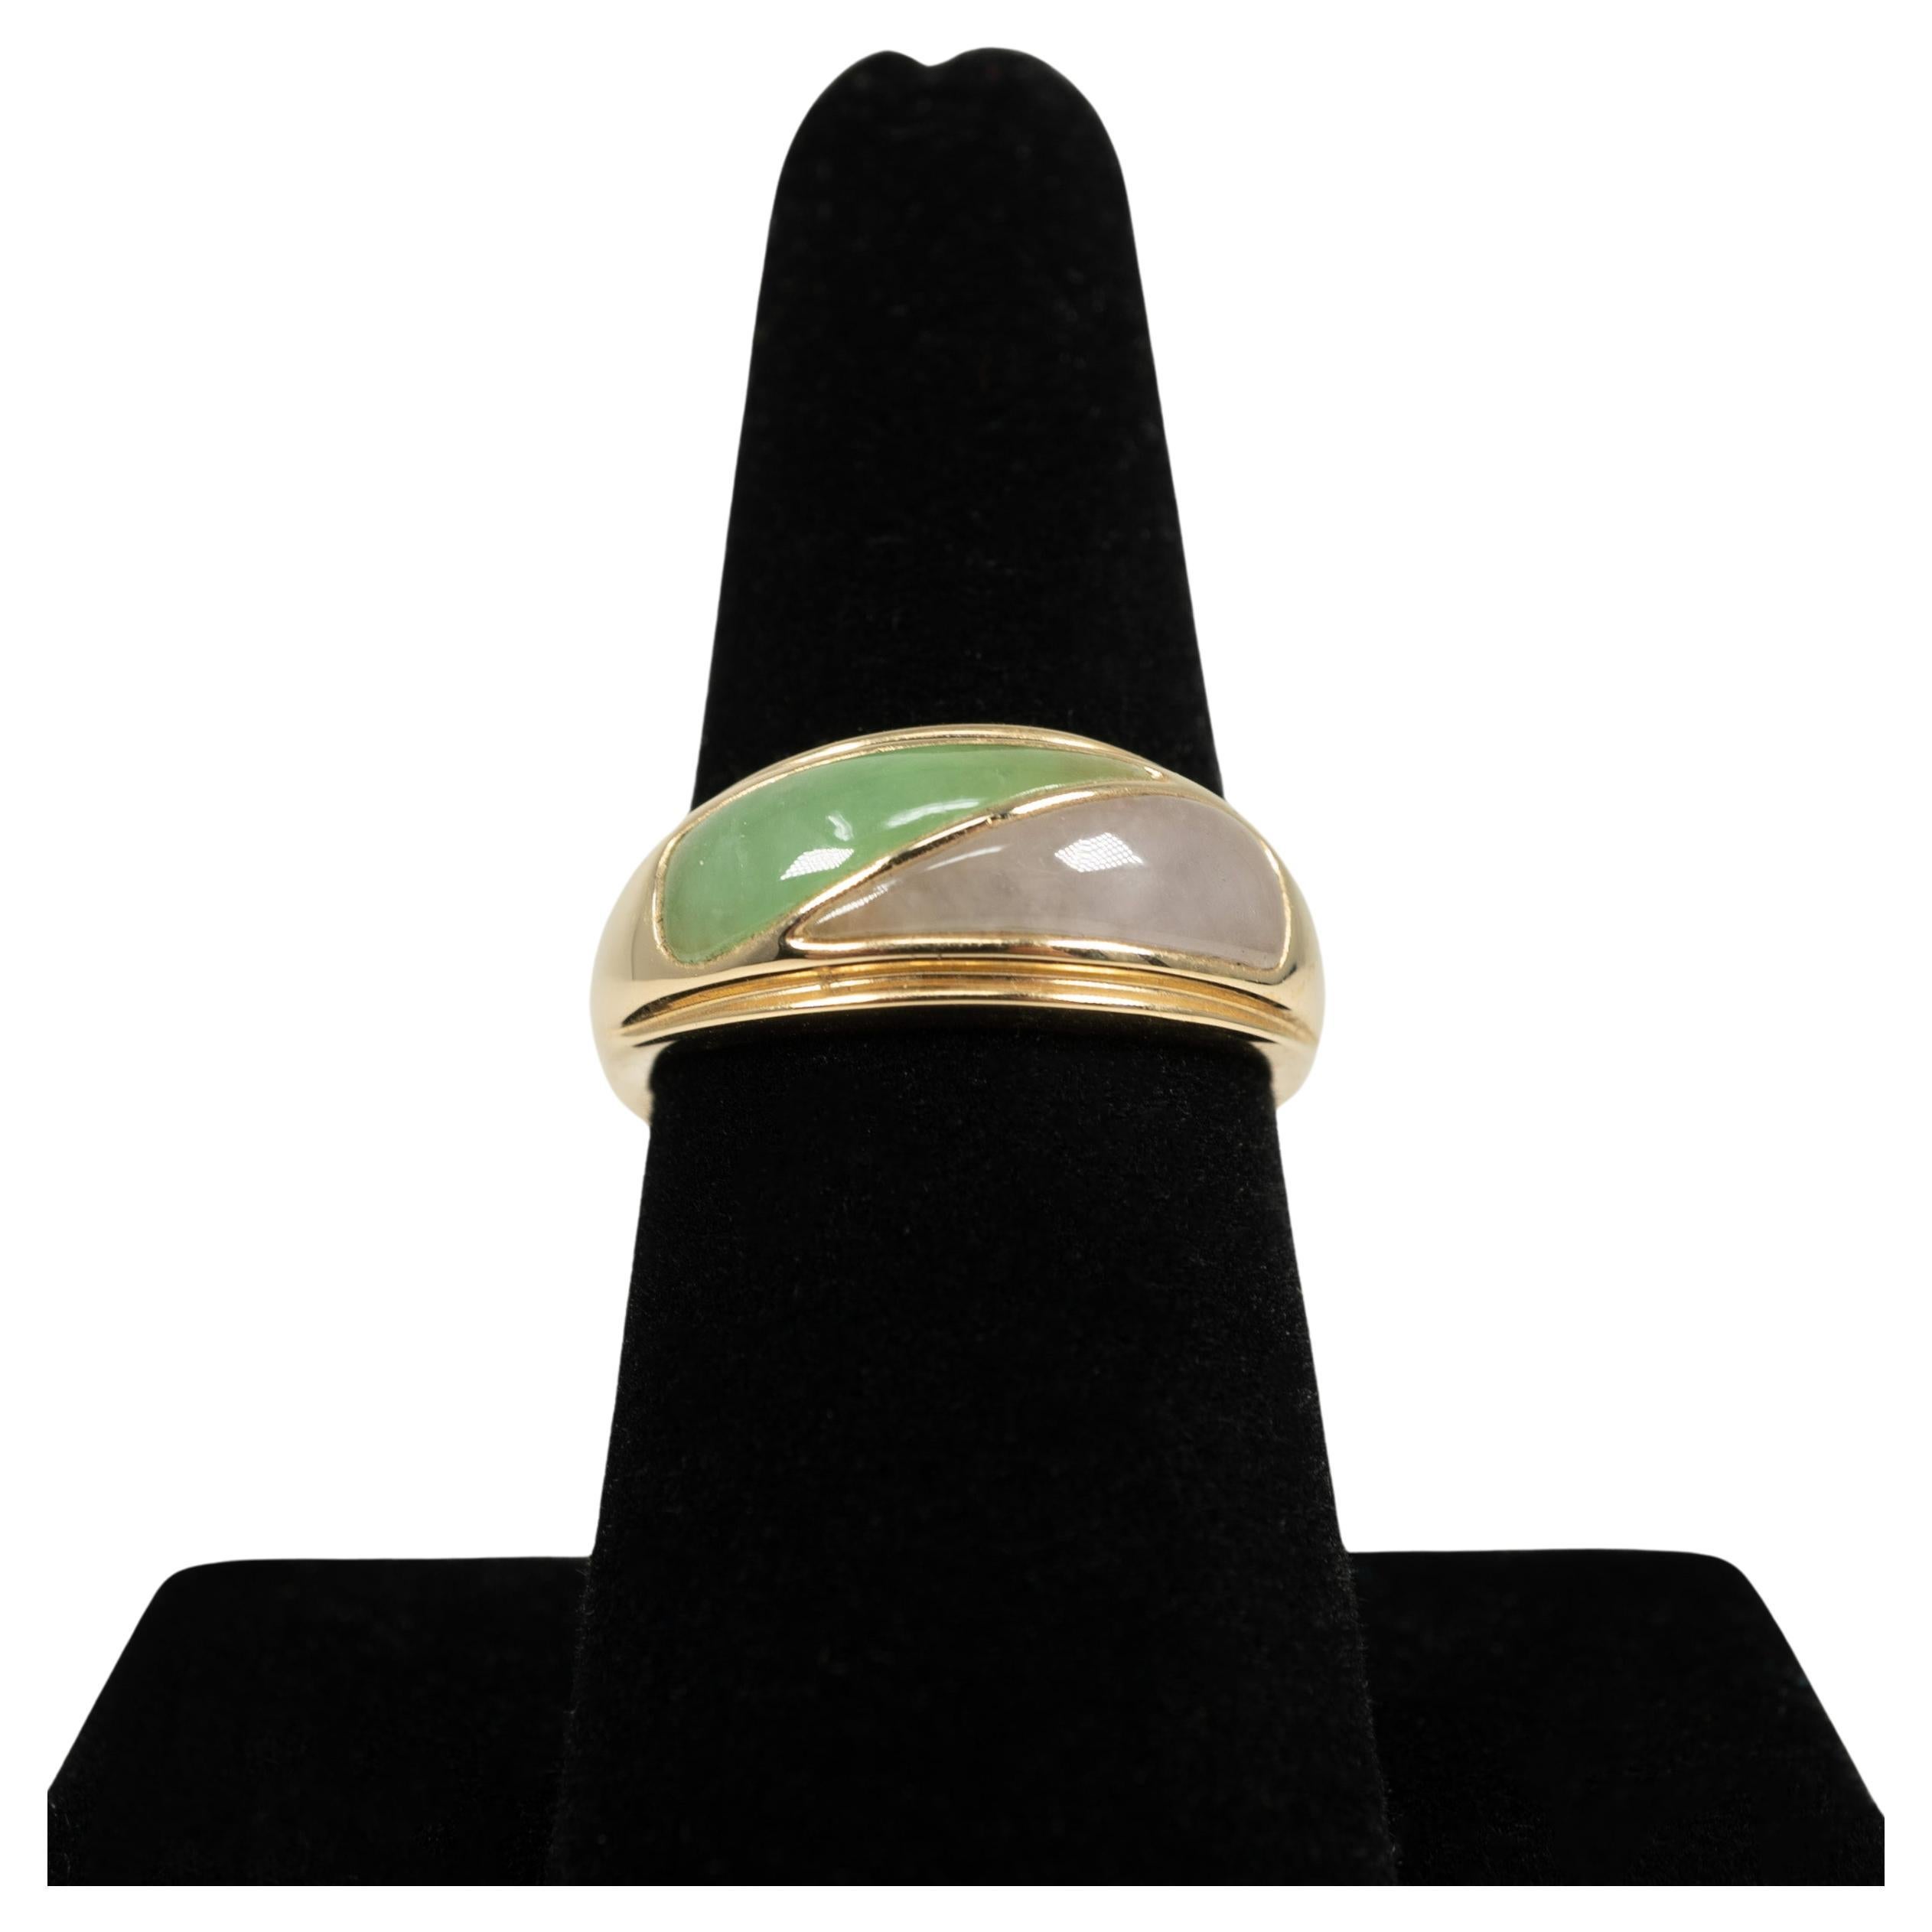 Beautiful inlays of lavender and green jade are the focal point of this ring!